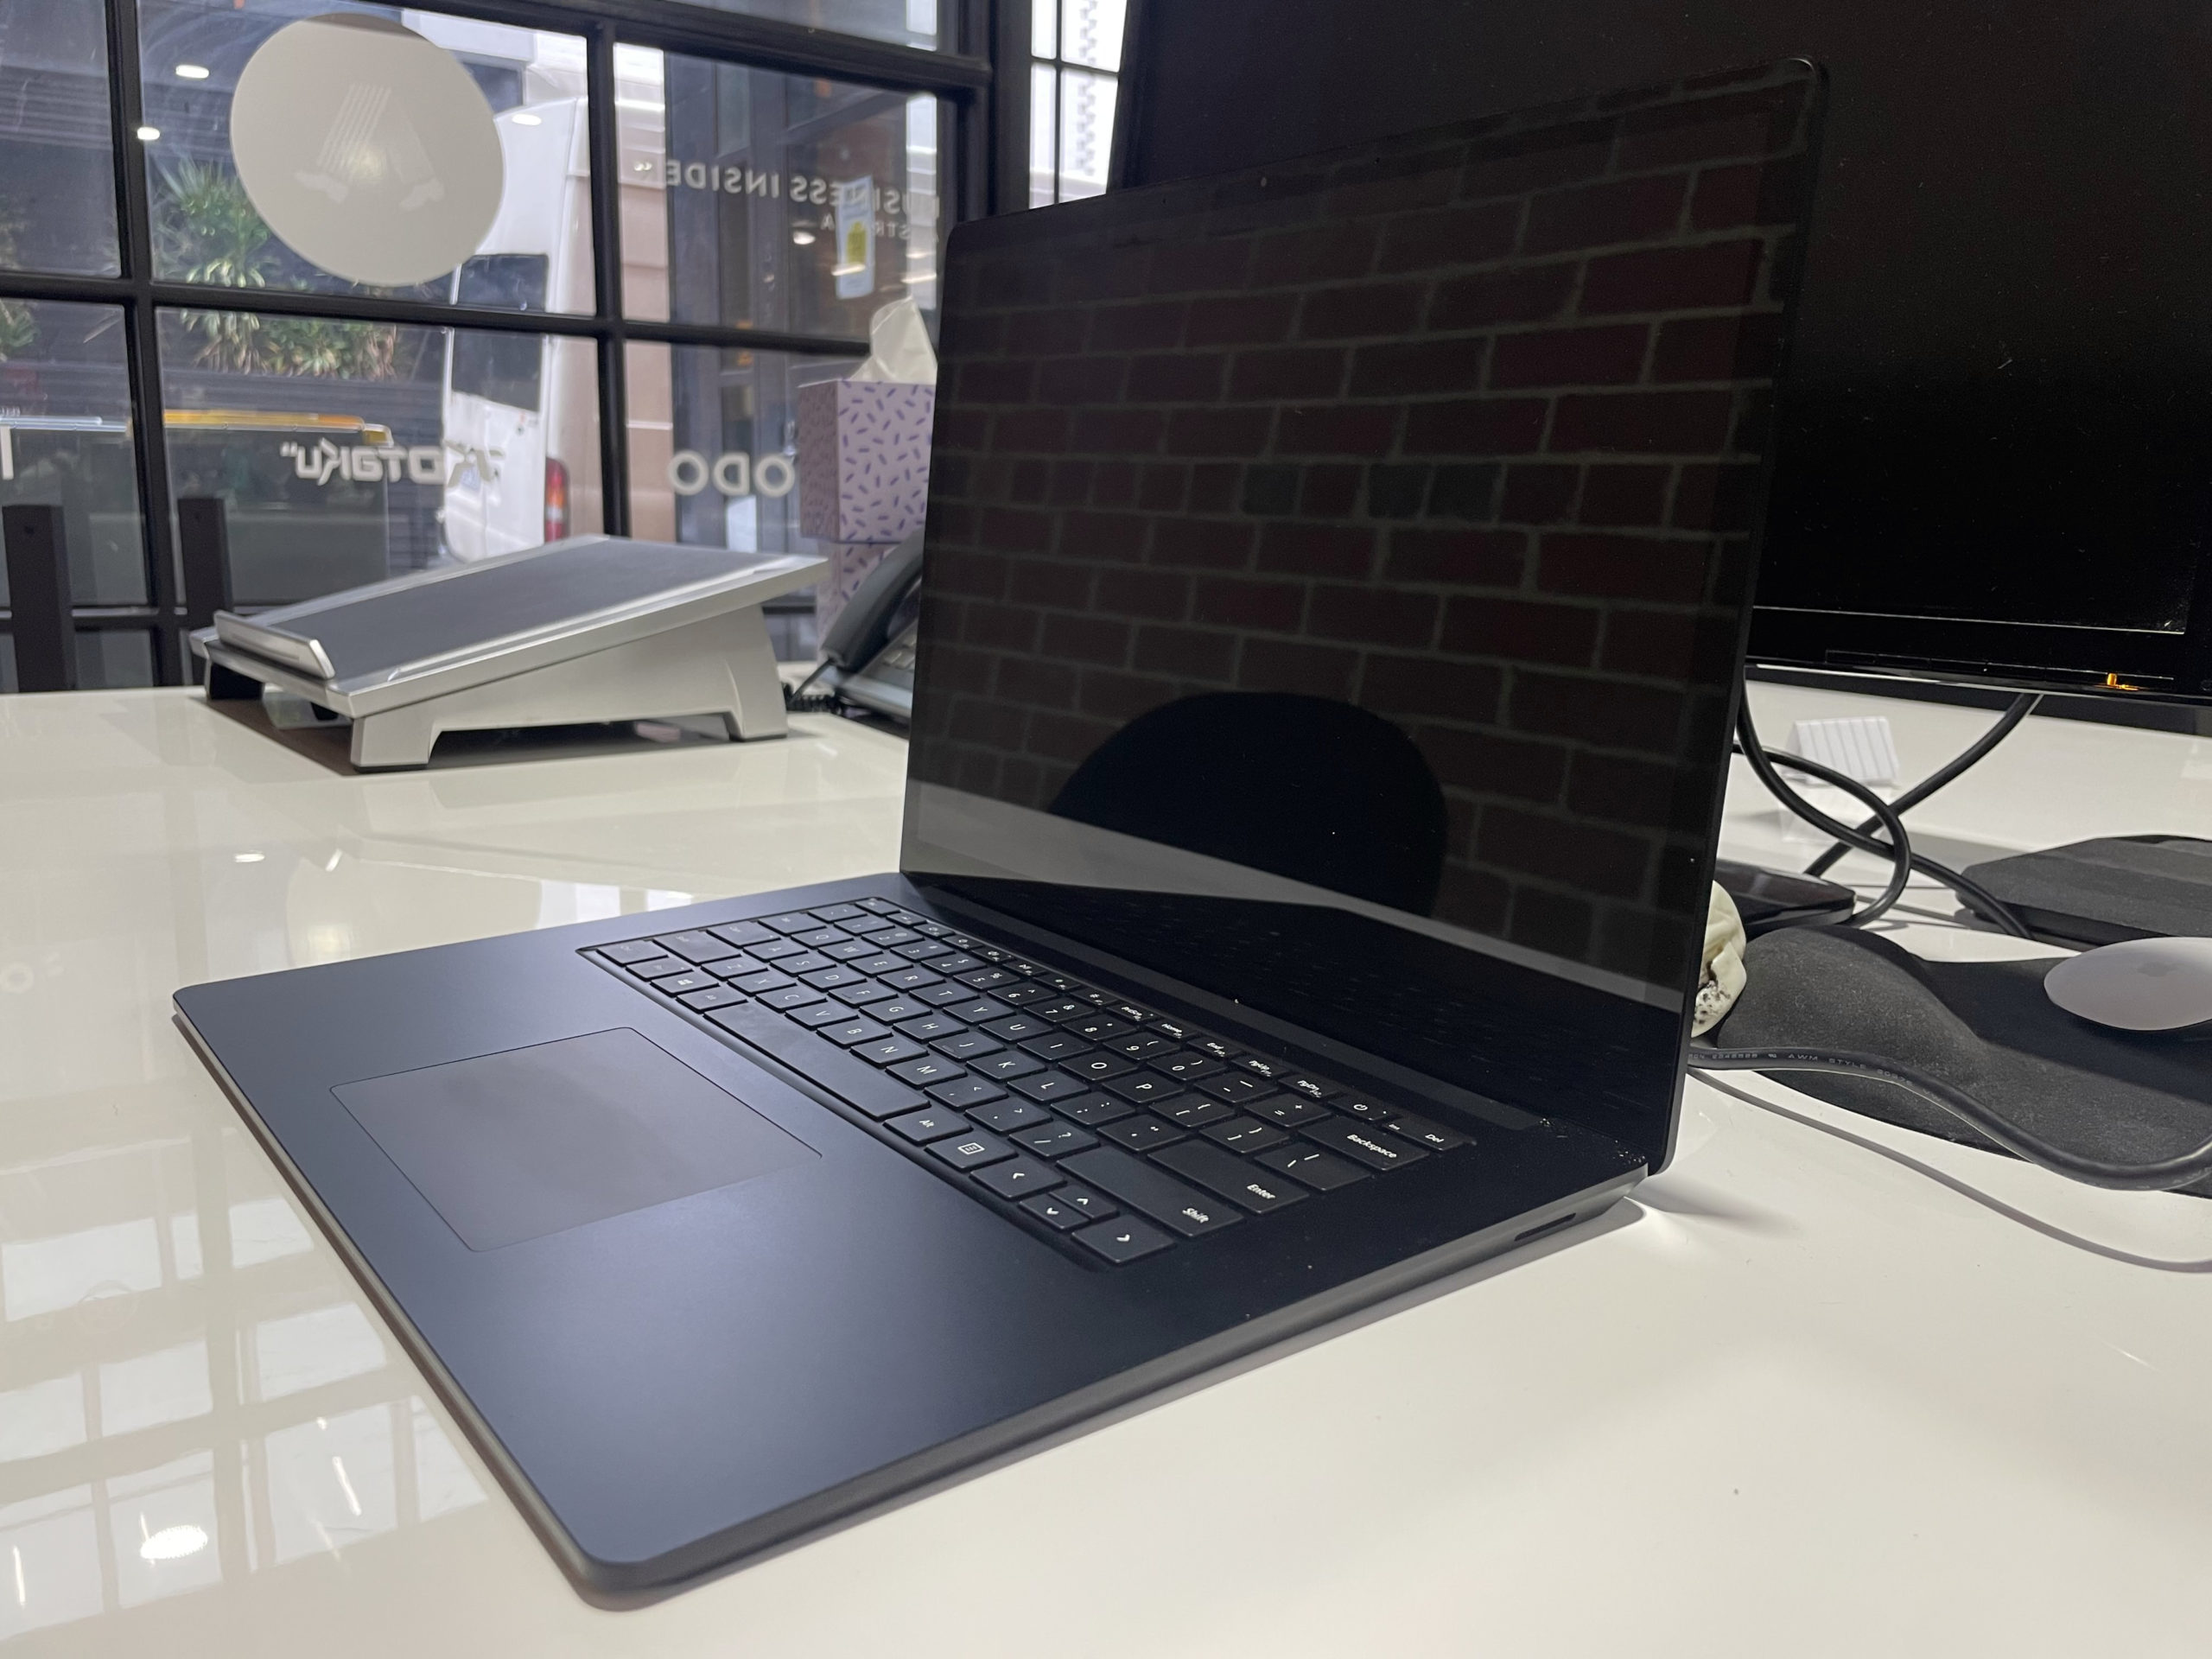 13.5-inch Microsoft Surface 4 with AMD Processor